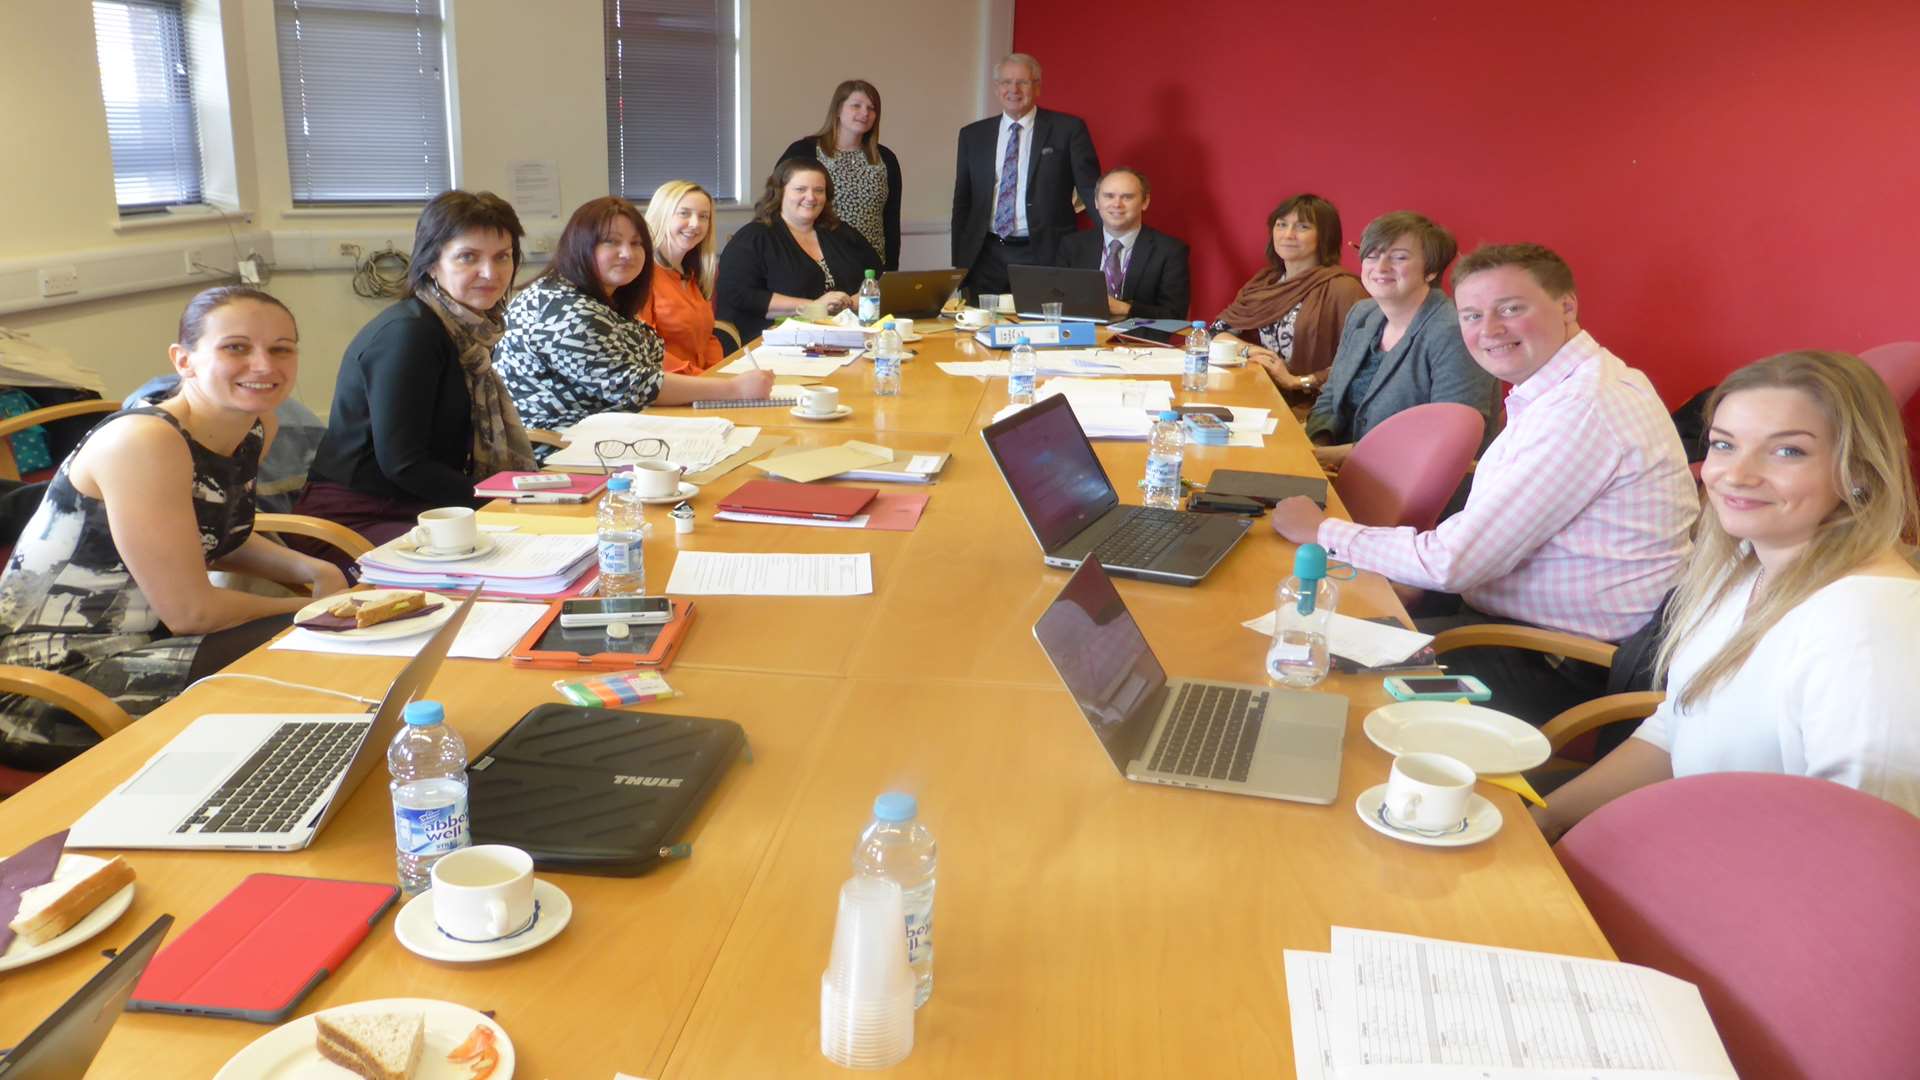 Partners and sponsors begin the process of selecting the winners and finalists for the 2015 Kent Teacher of the Year Awards. The judging session took place in the Senate Building at the University of Kent.